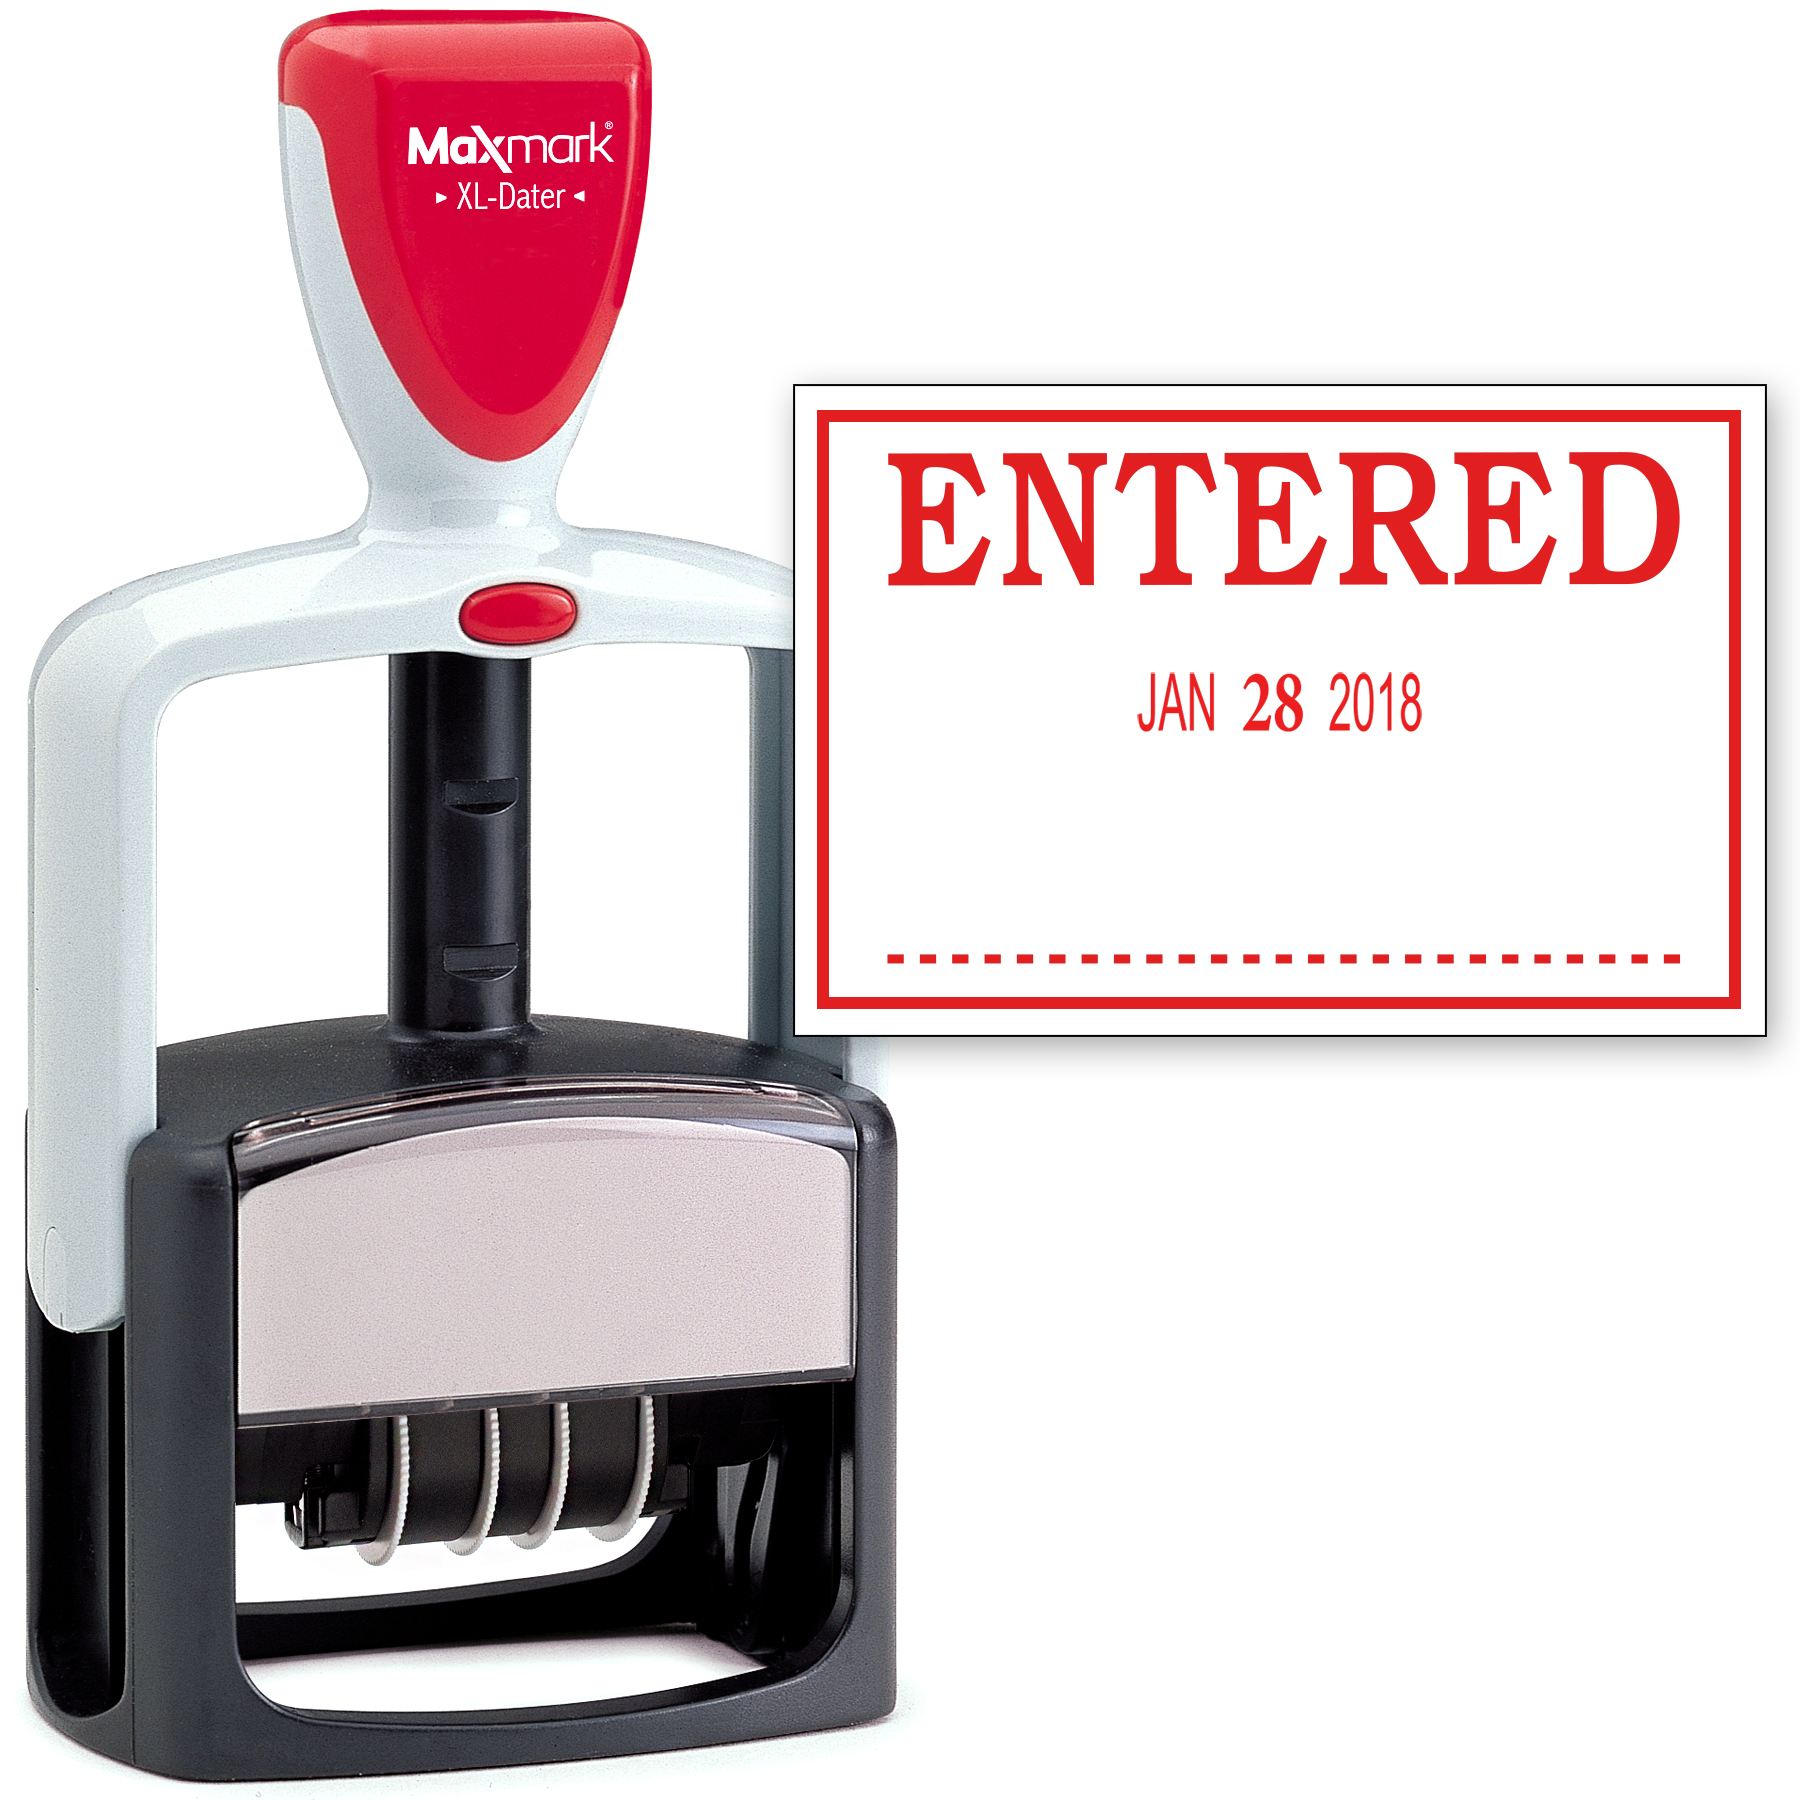 2000 PLUS Heavy Duty Style 2-Color Date Stamp with ENTERED self inking stamp - Red Ink